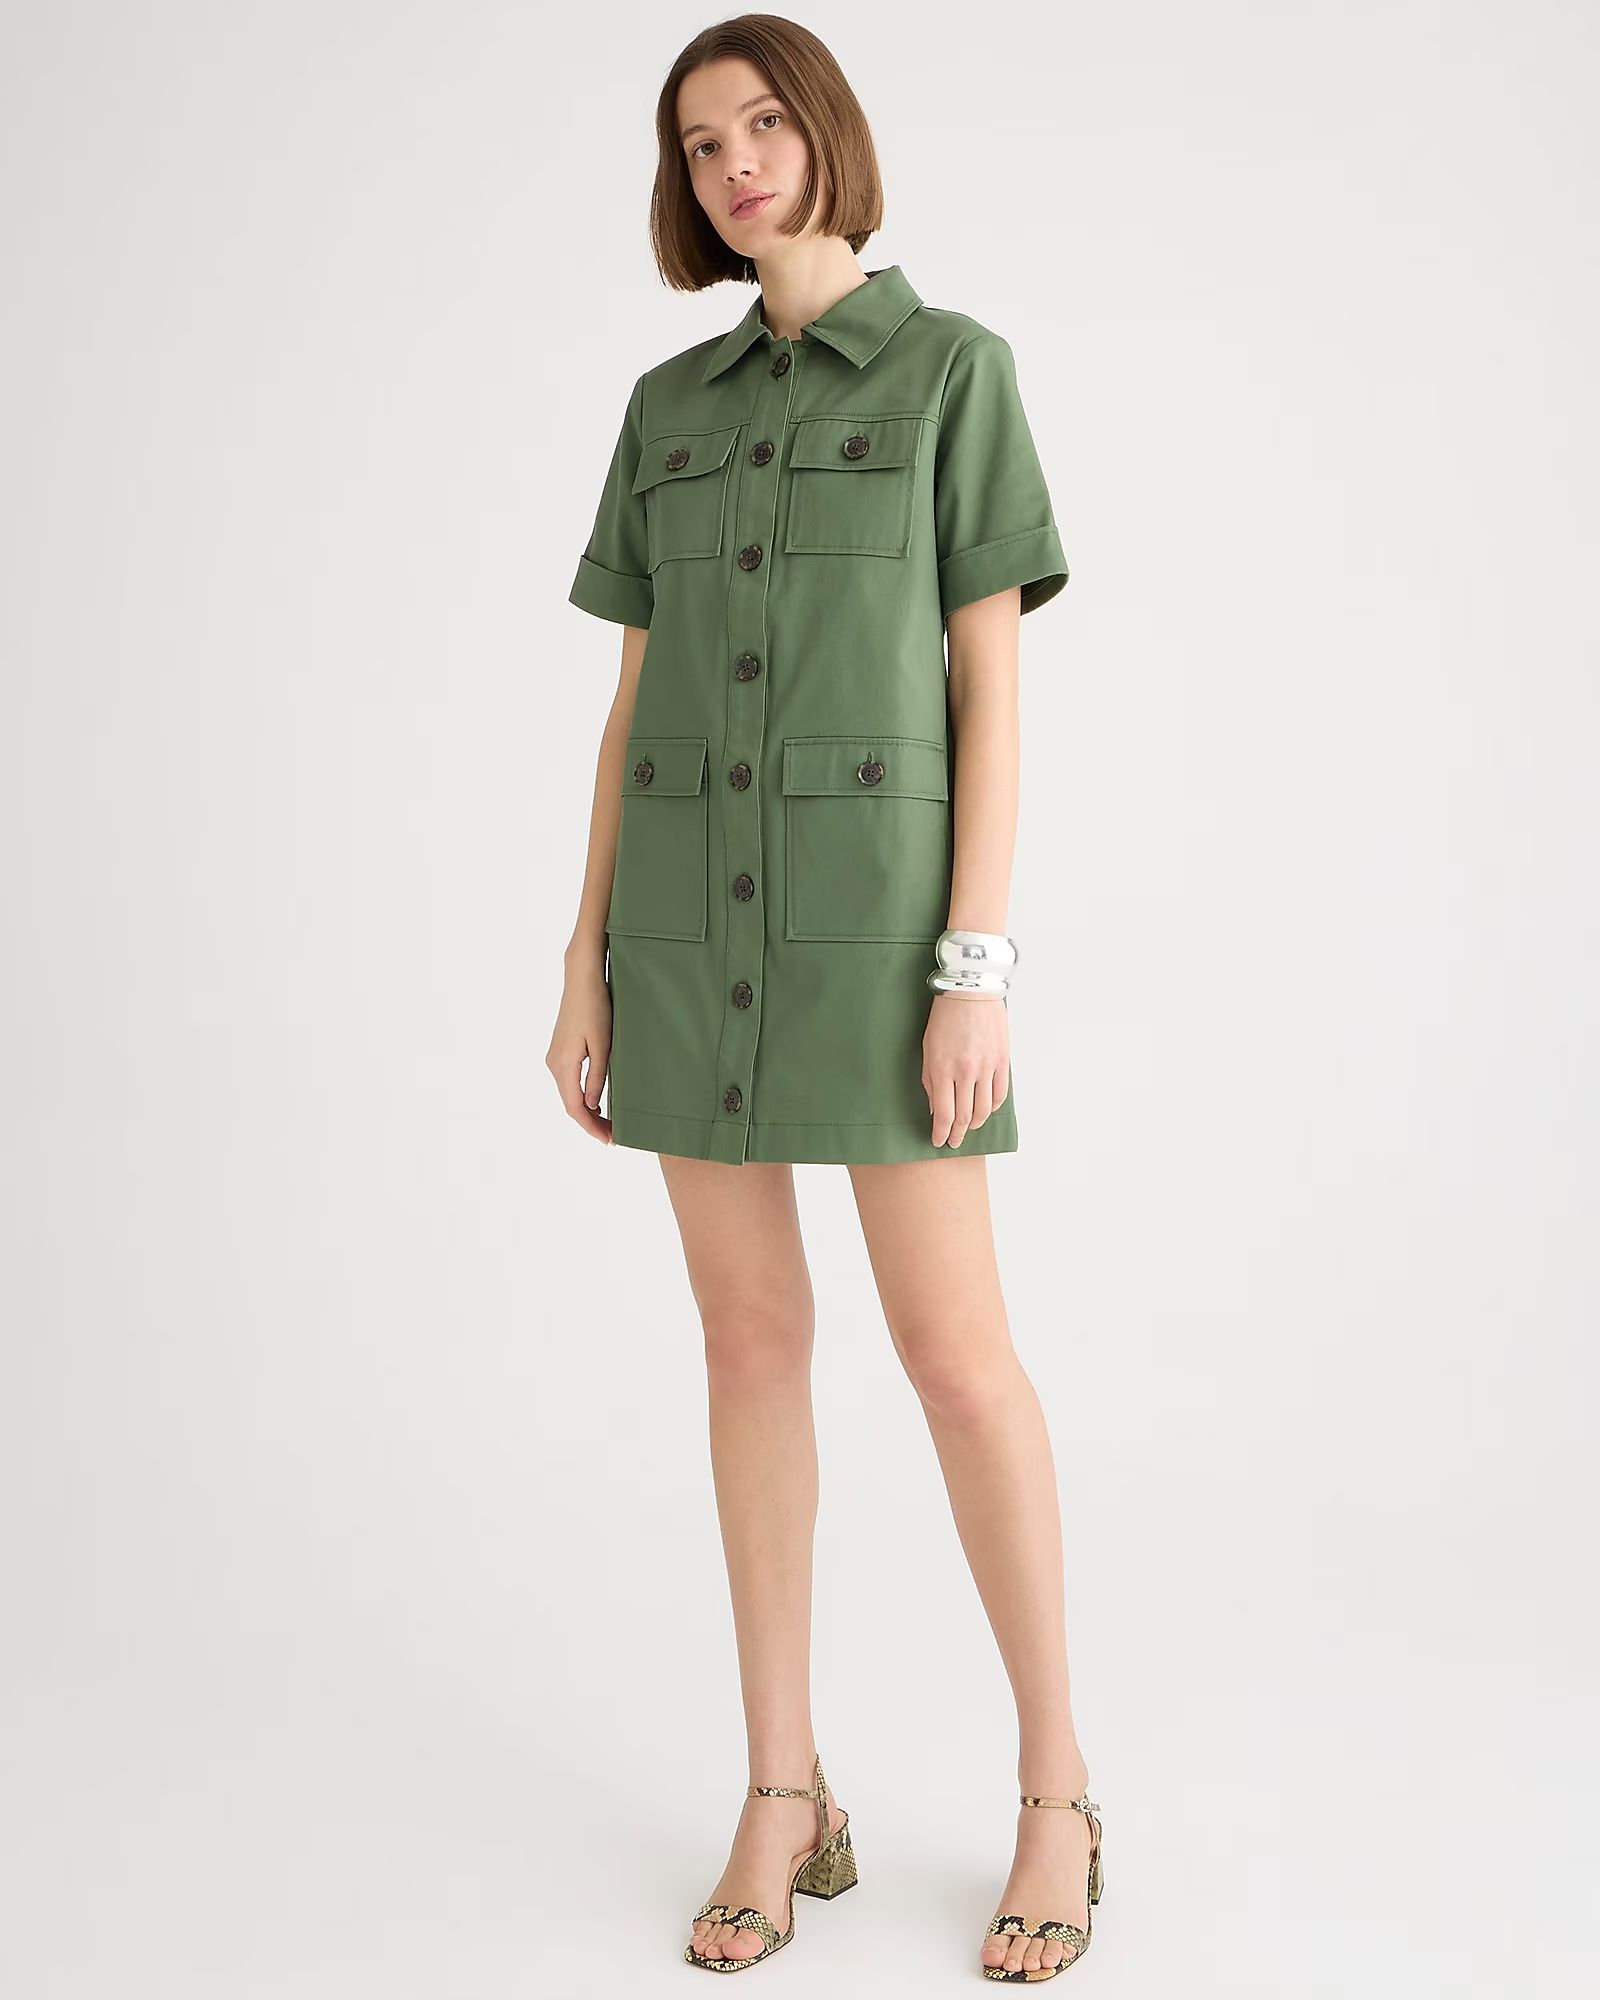 top rated4.4(69 REVIEWS)Gamine shirtdress in stretch twill$69.50$128.00 (46% Off)Limited time. Pr... | J.Crew US